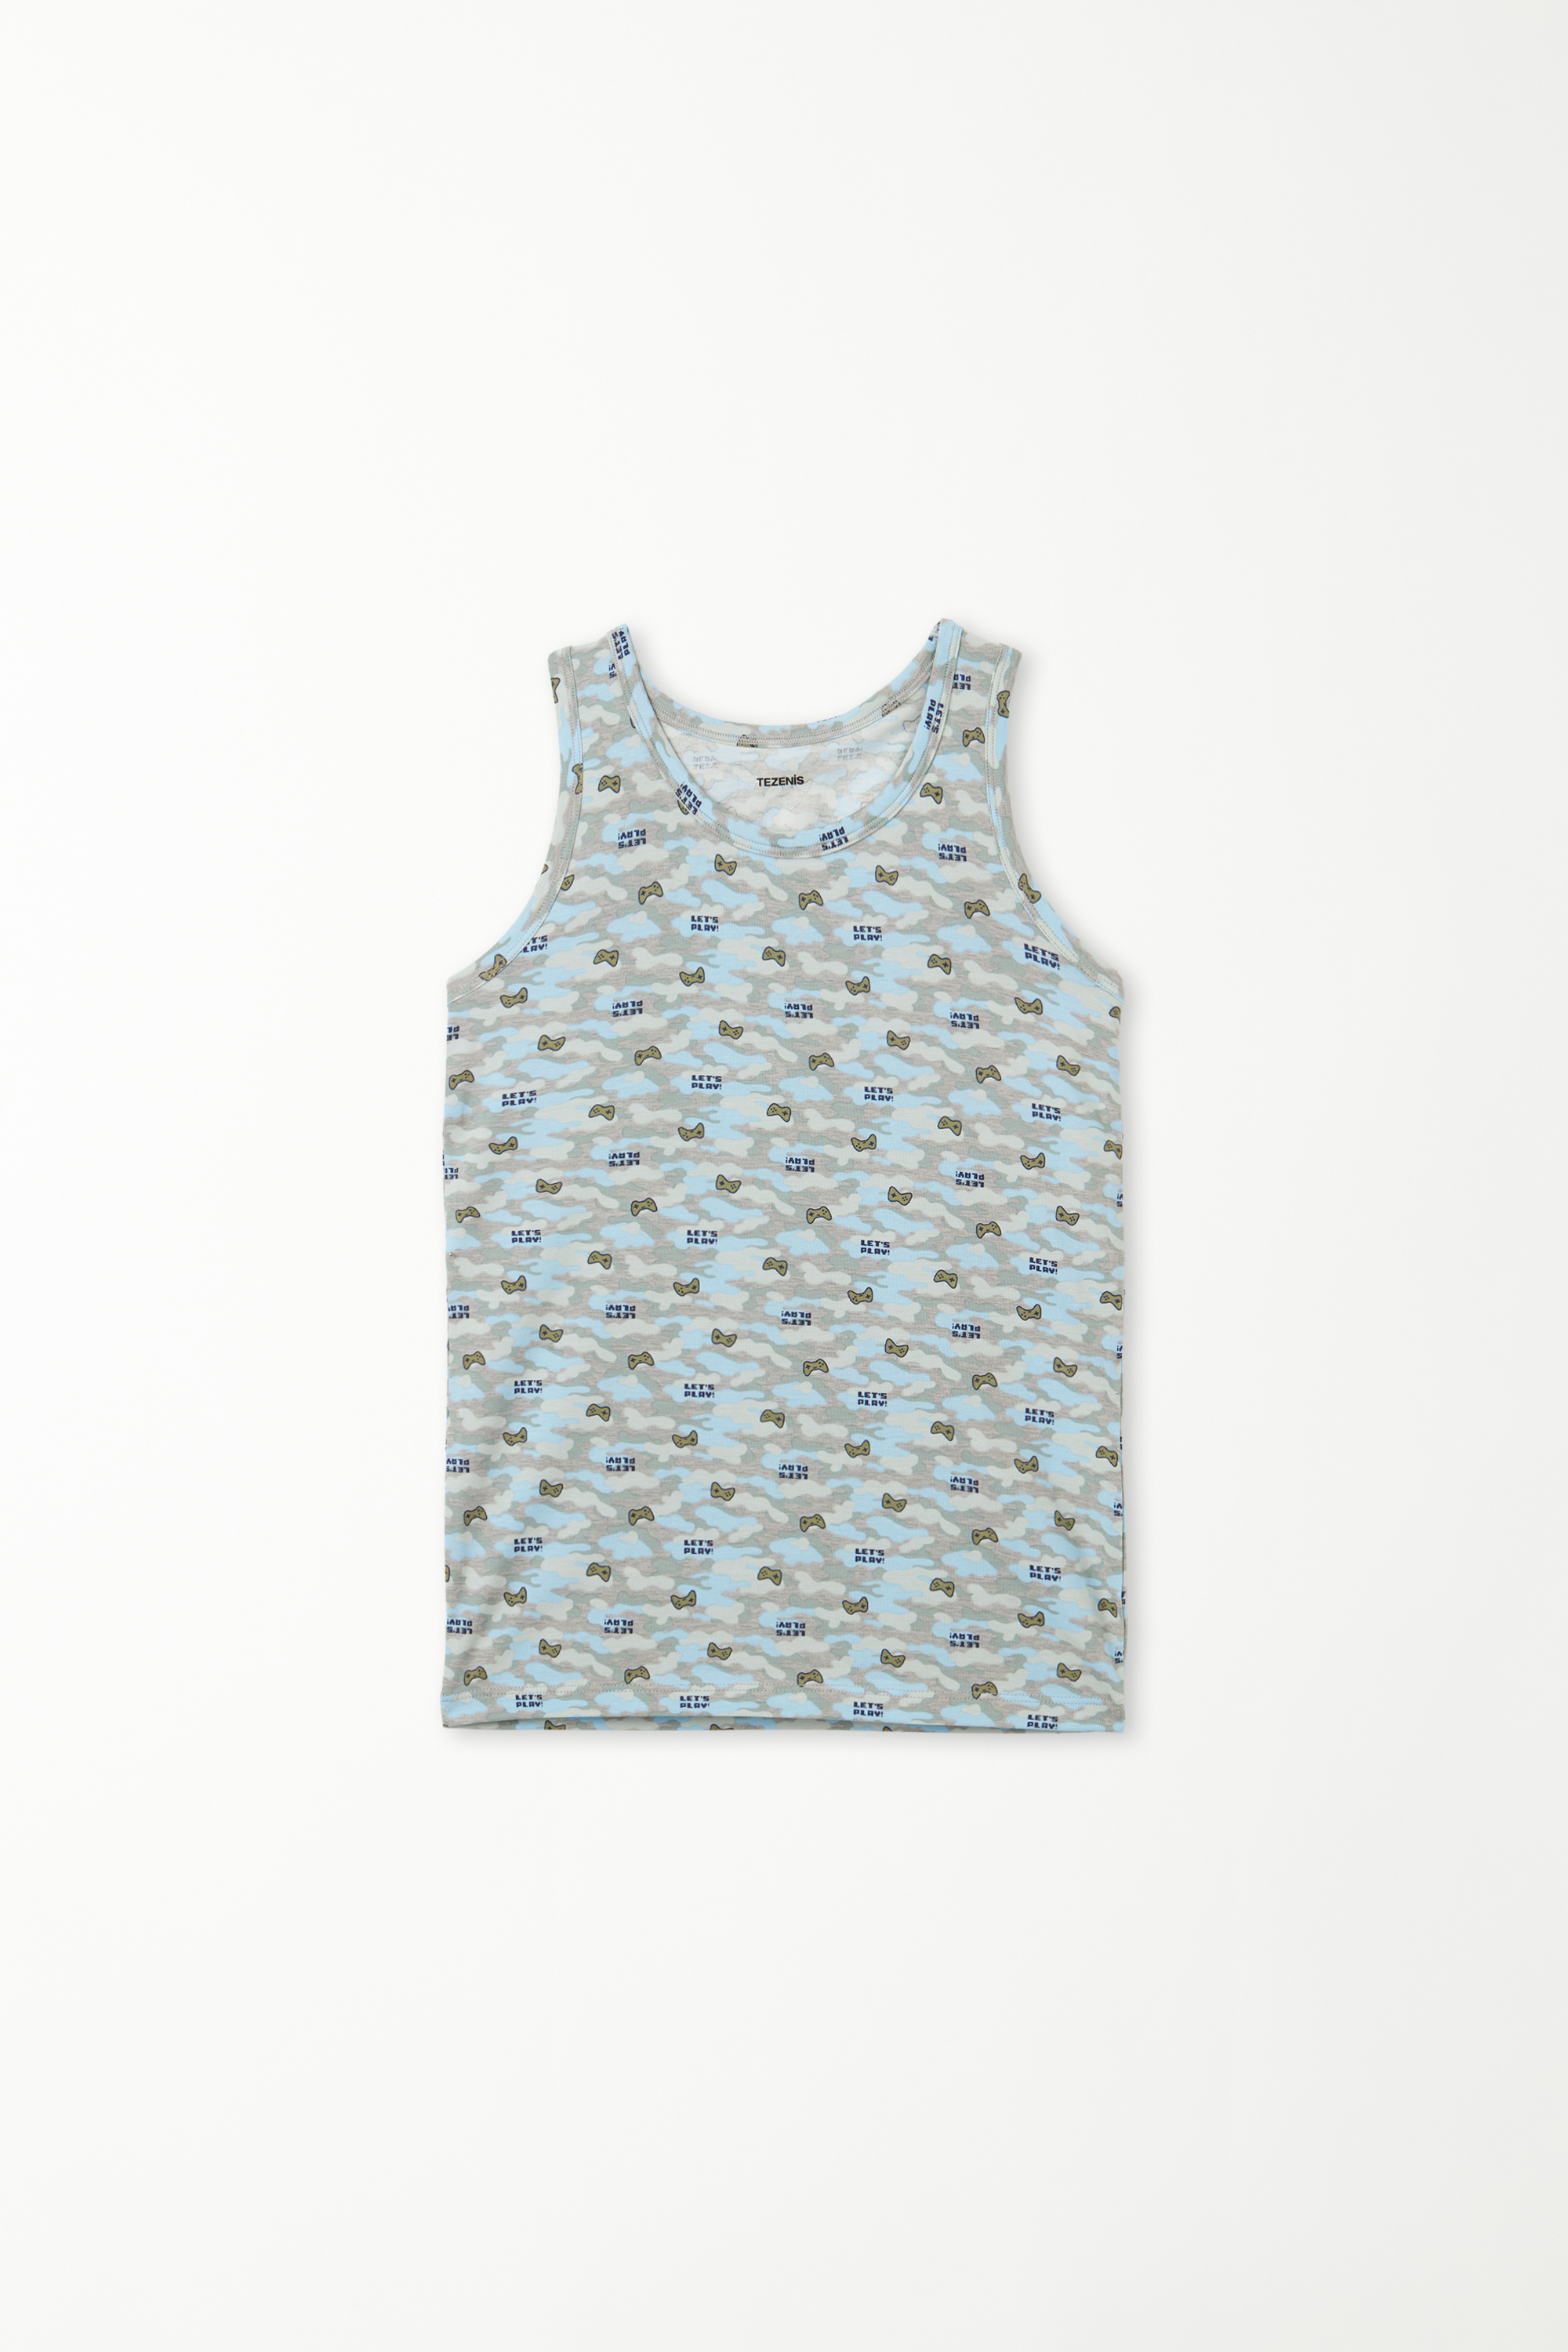 Unisex Kids' Printed Cotton Camisole with Wide Shoulder Straps